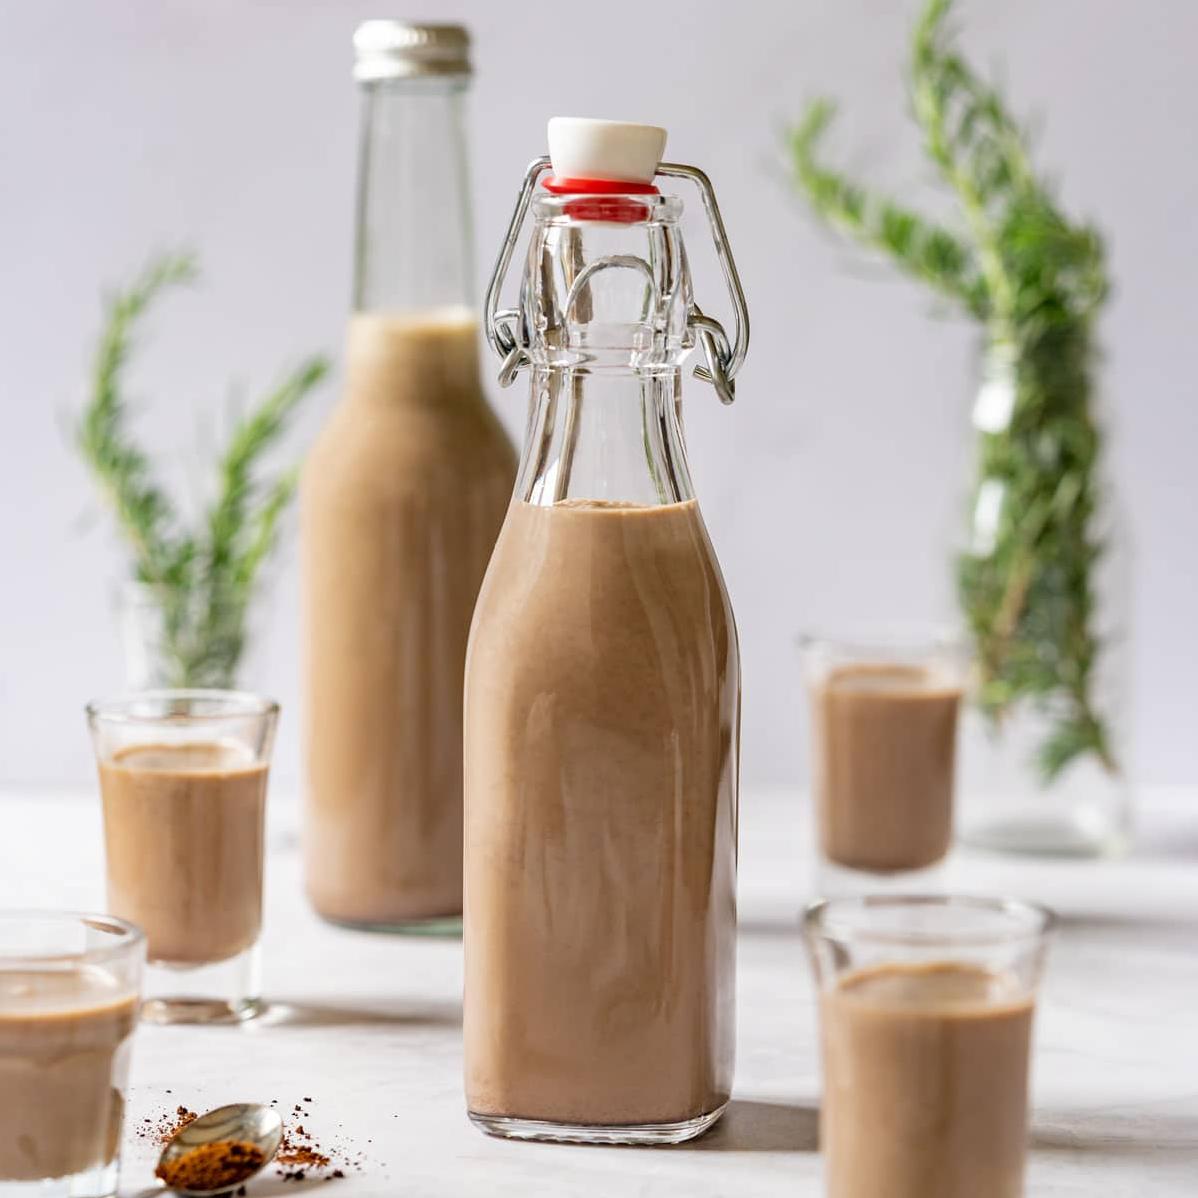  A bottle of homemade Irish cream, ready to be shared with friends and family.